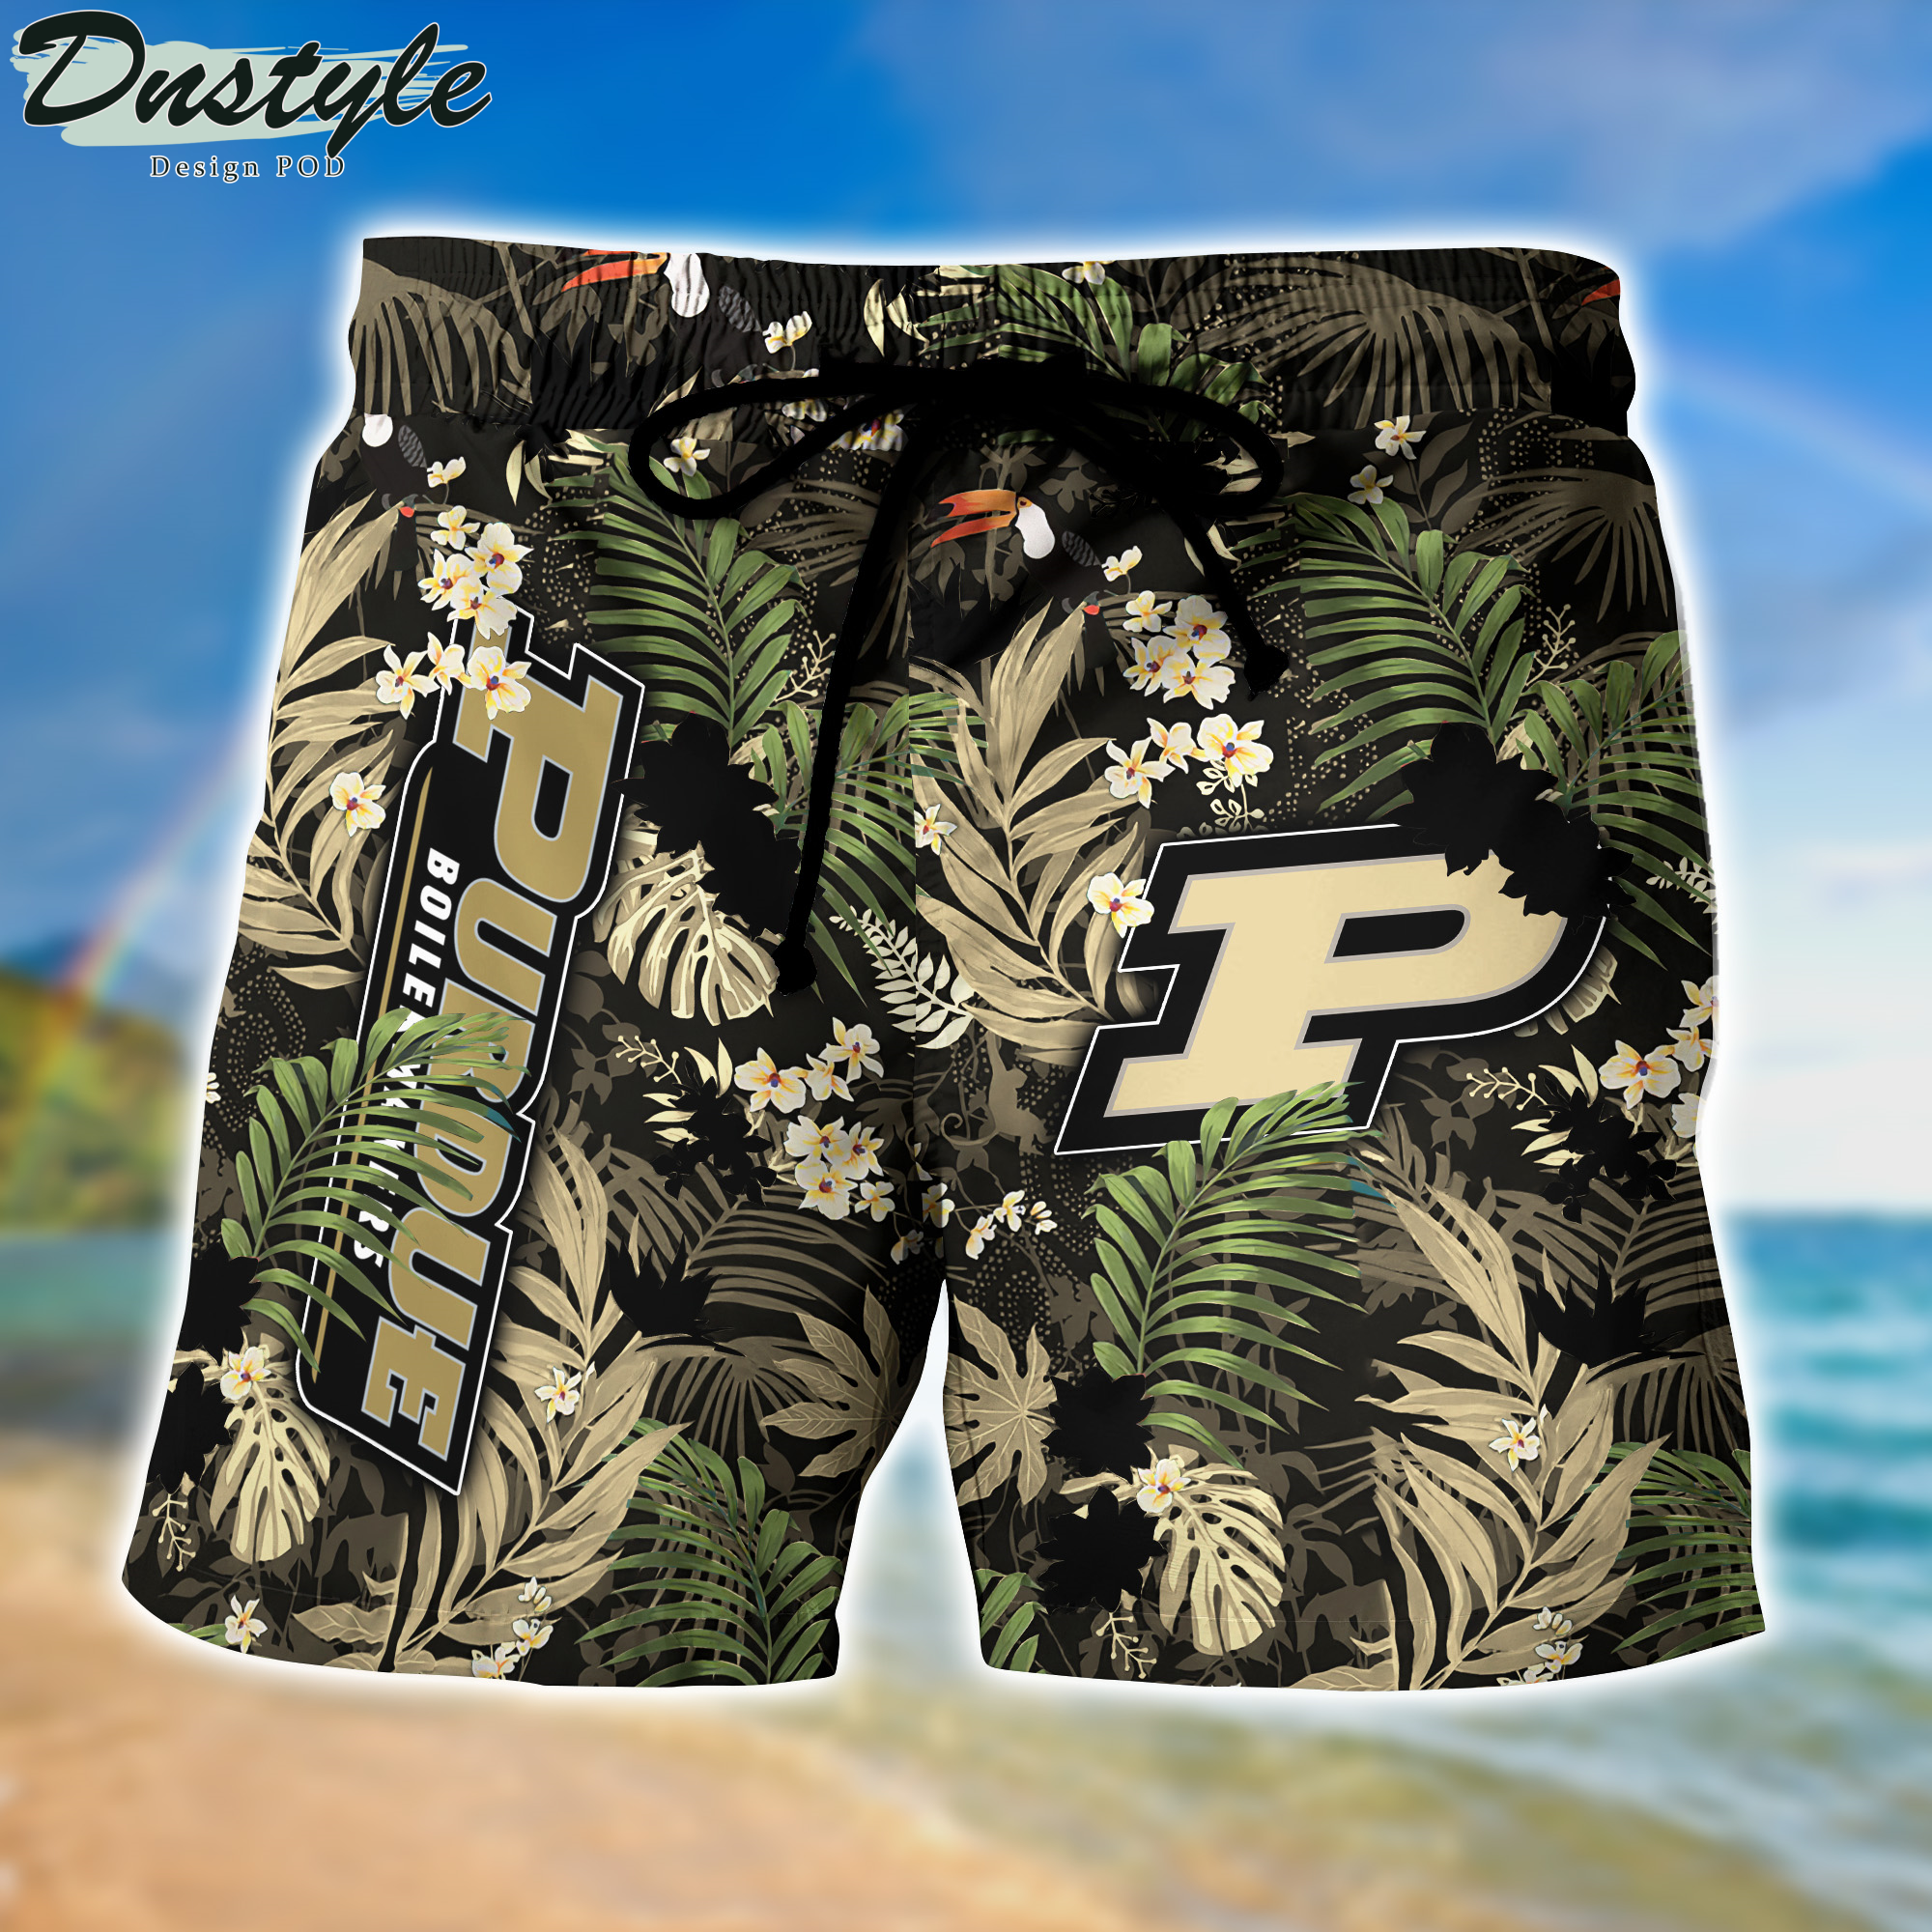 Purdue Boilermakers Hawaii Shirt And Shorts New Collection